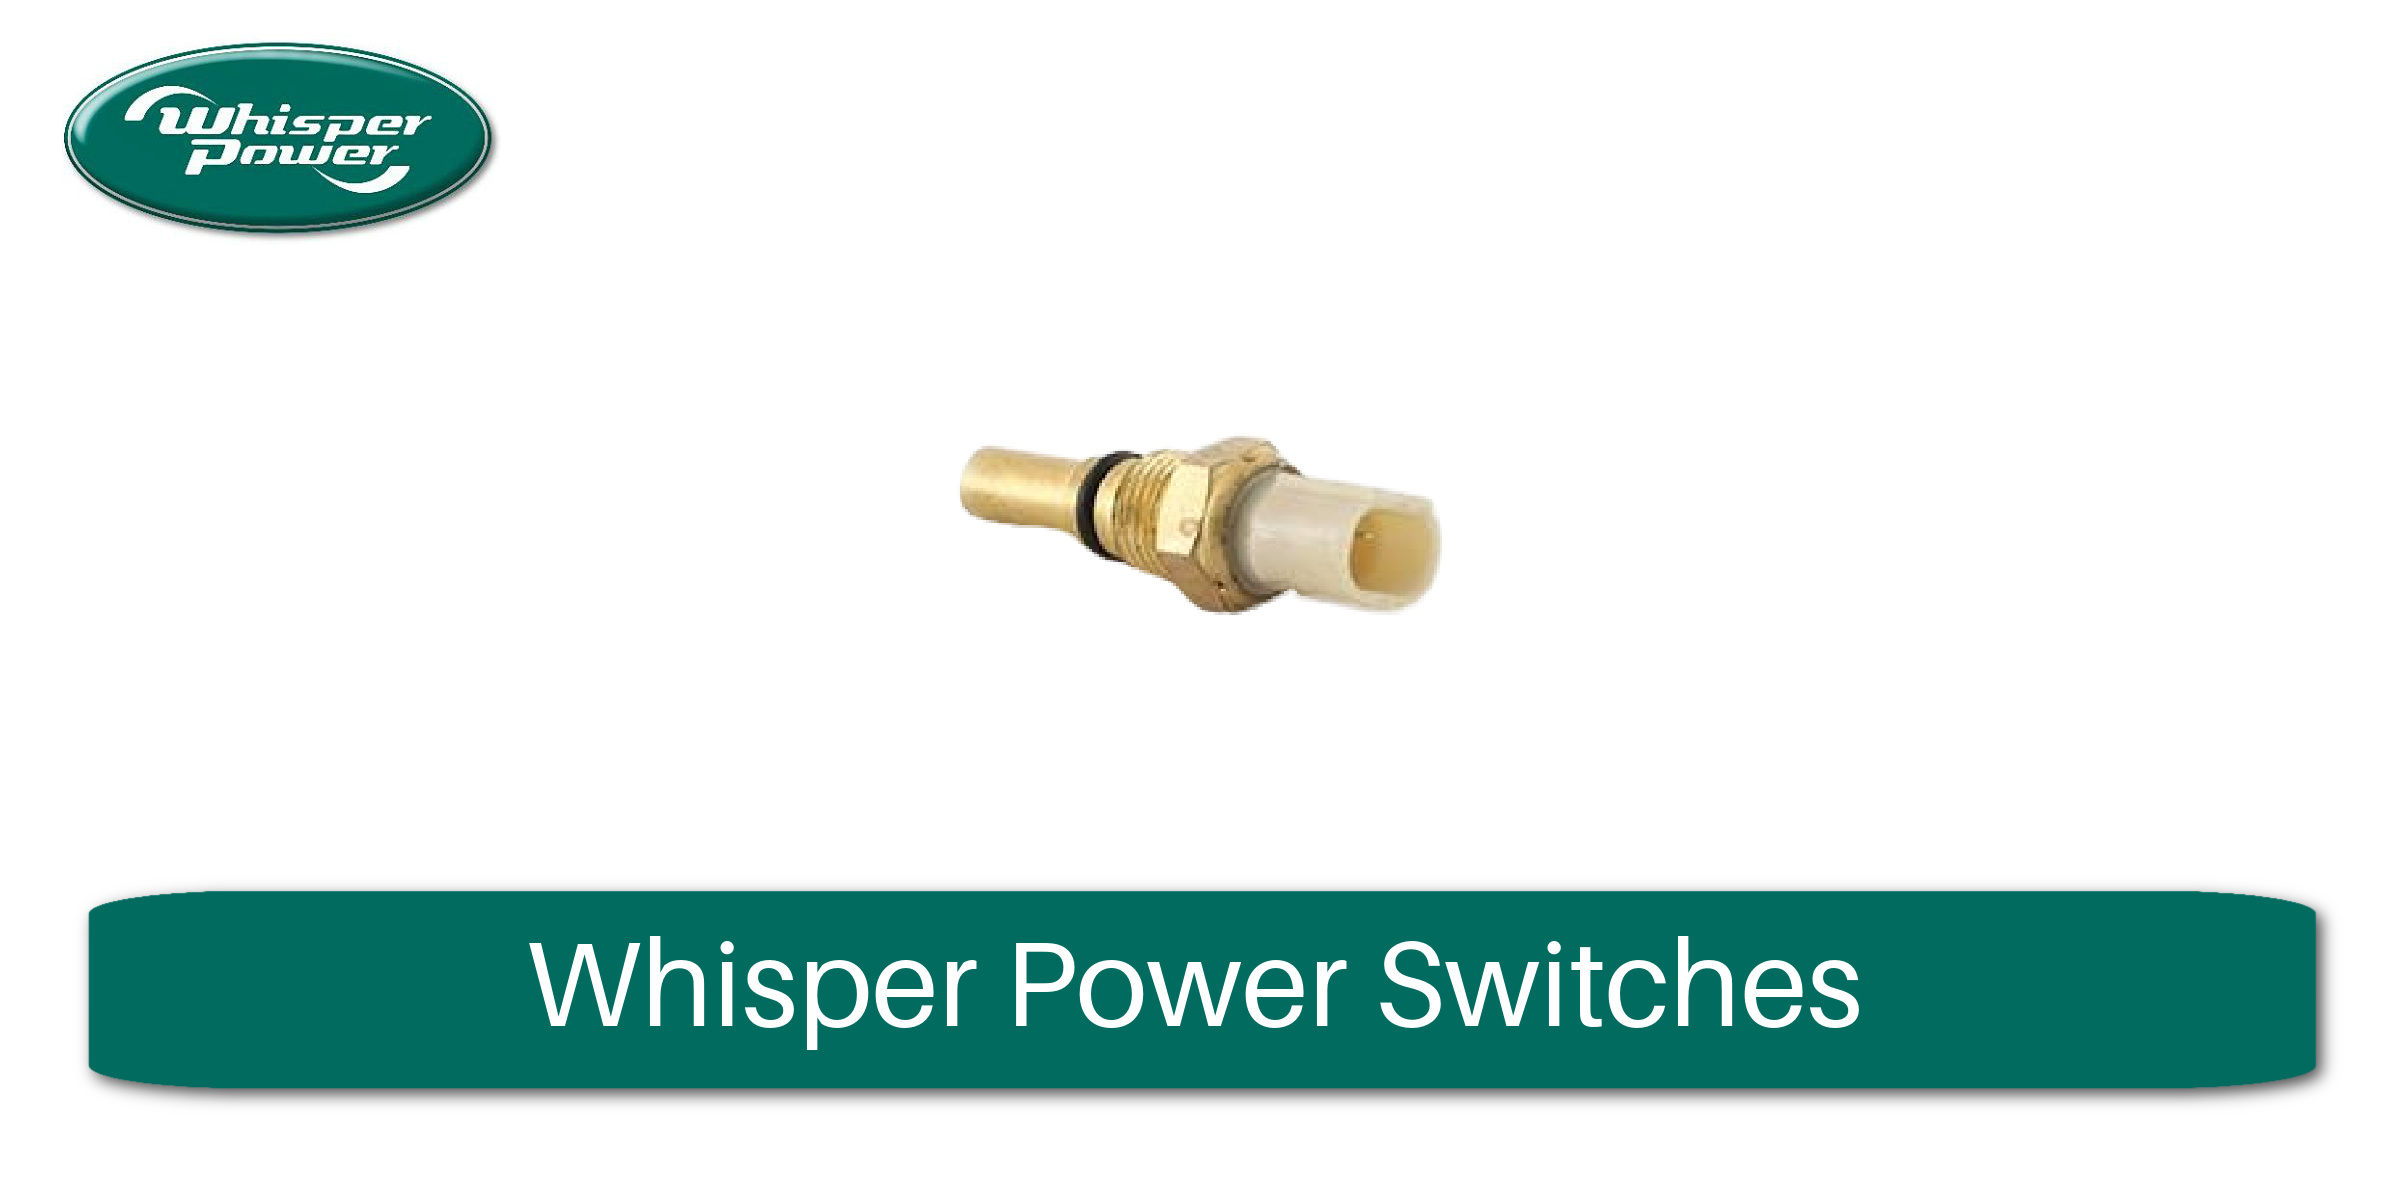 Whisper Power Switches